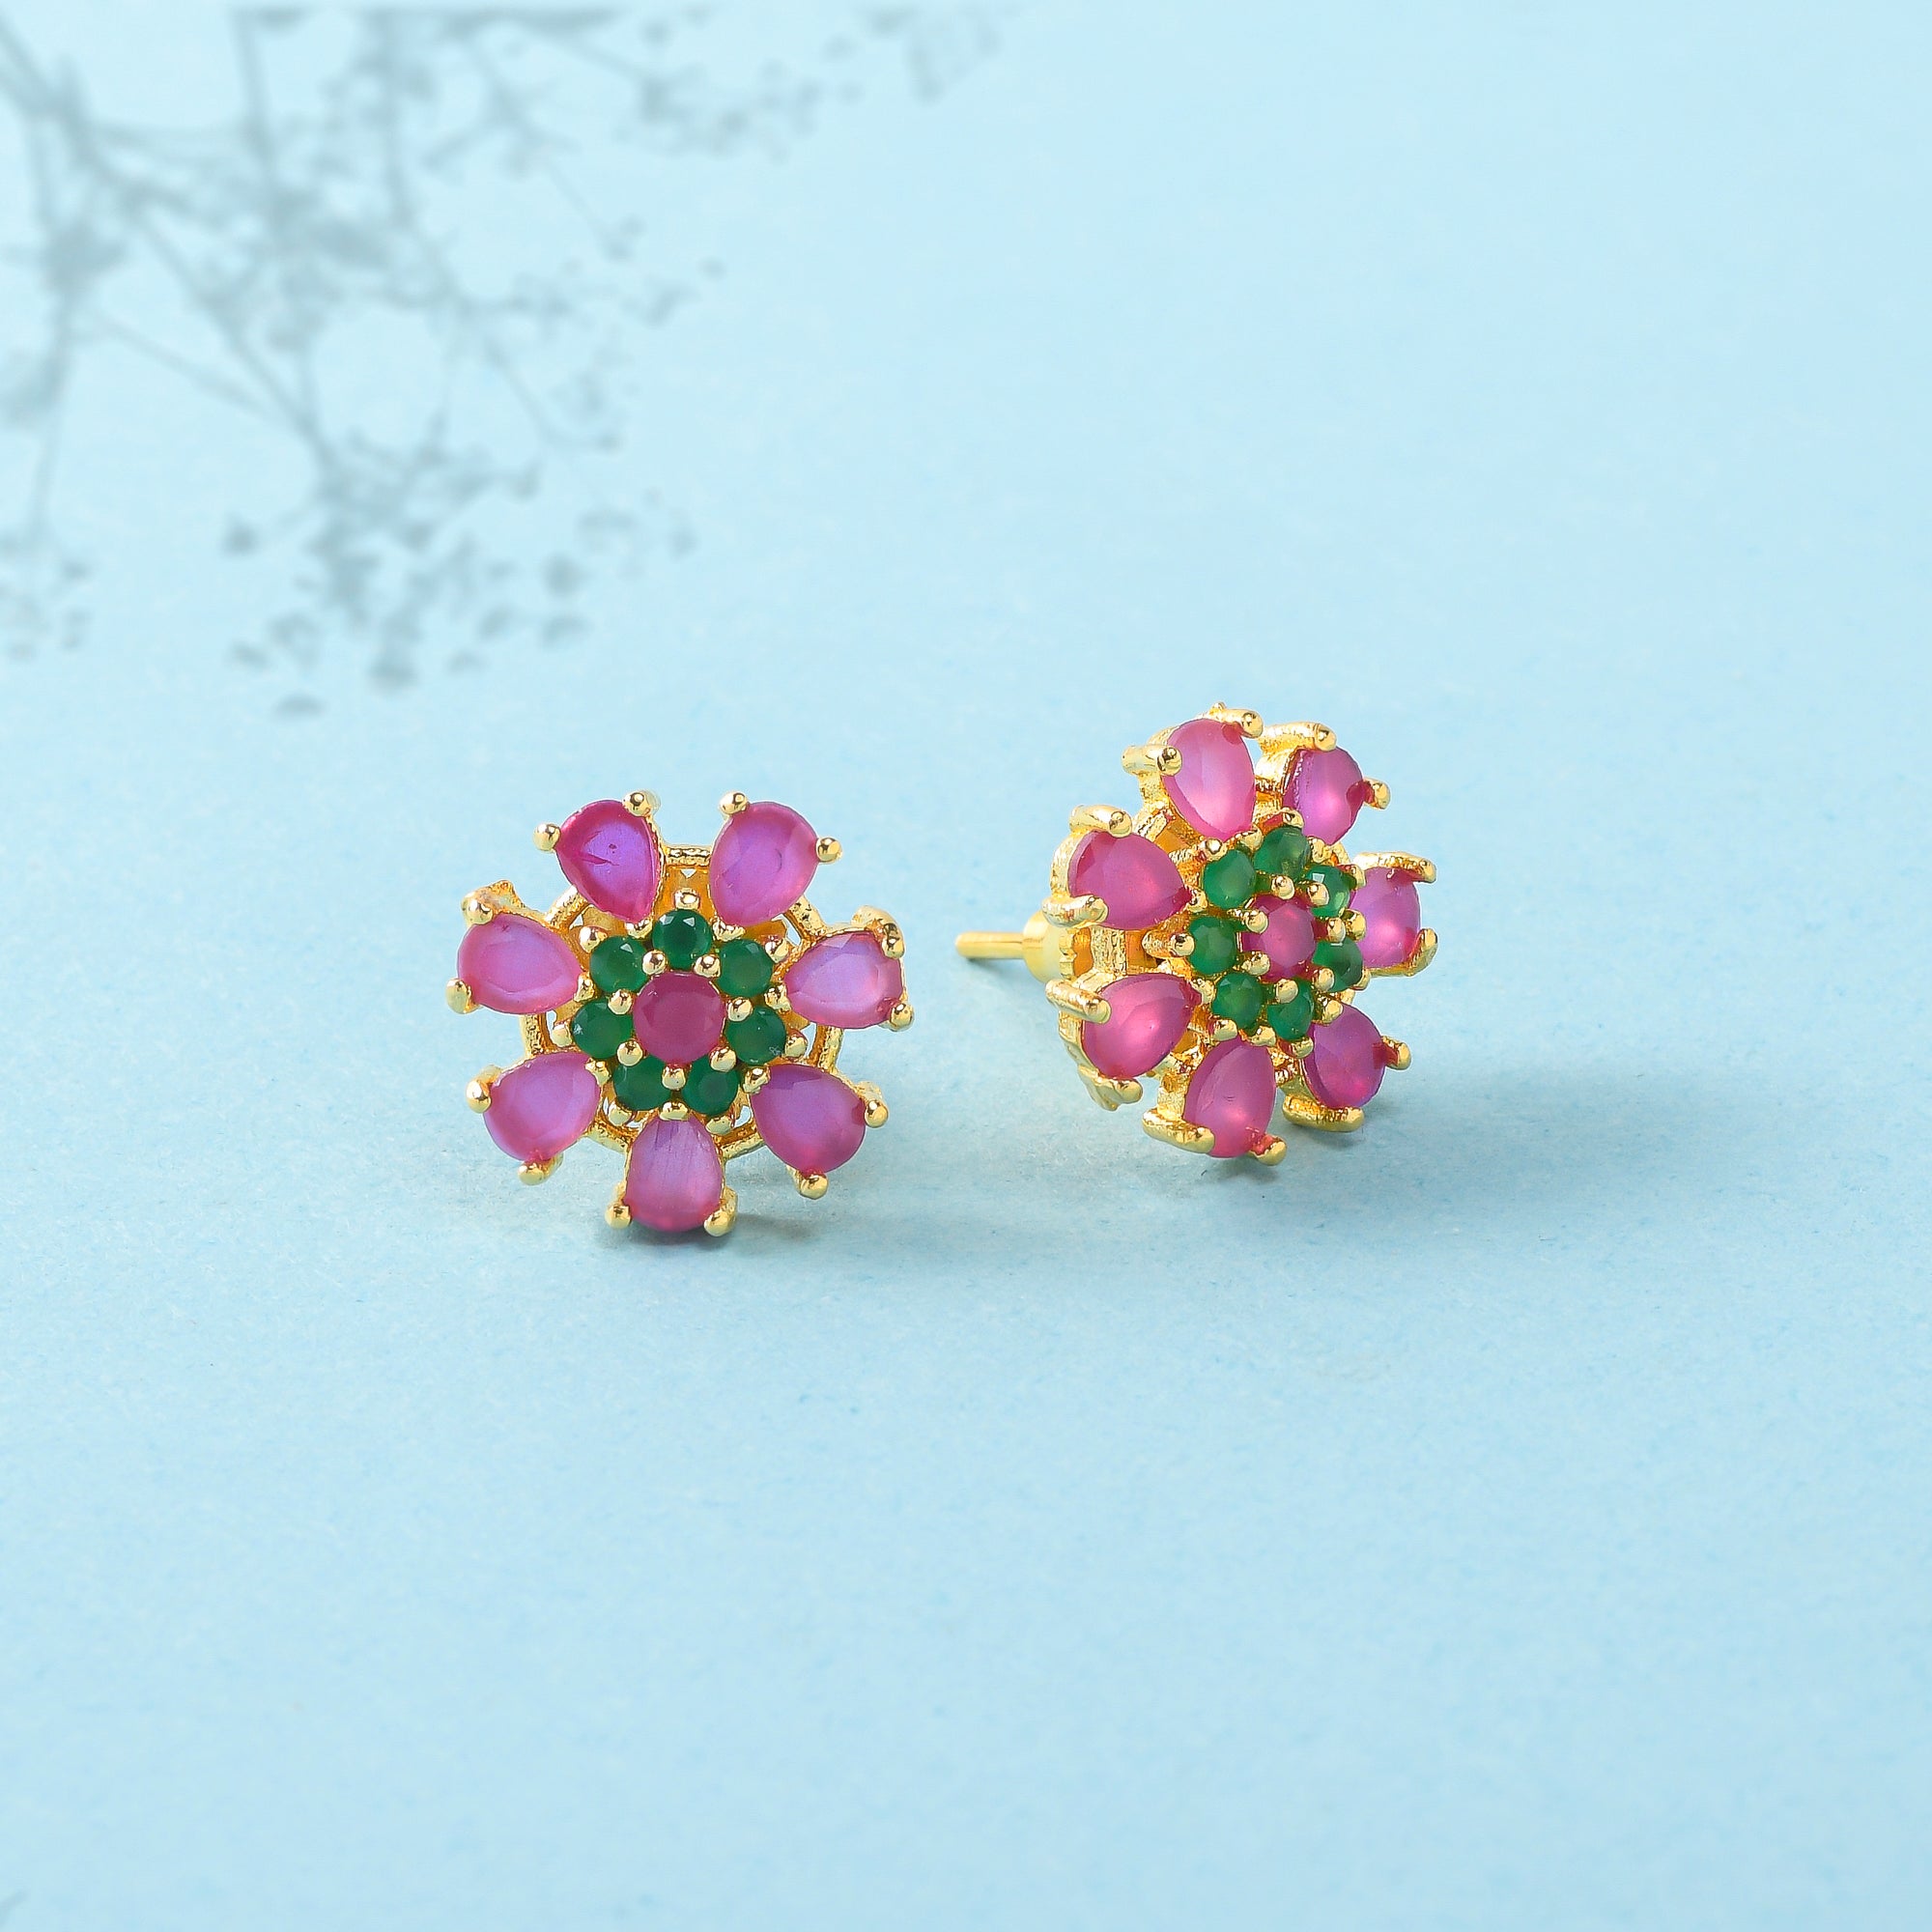 Women's Tiny Pink And Green Cz Gems Stud Earrings - Voylla